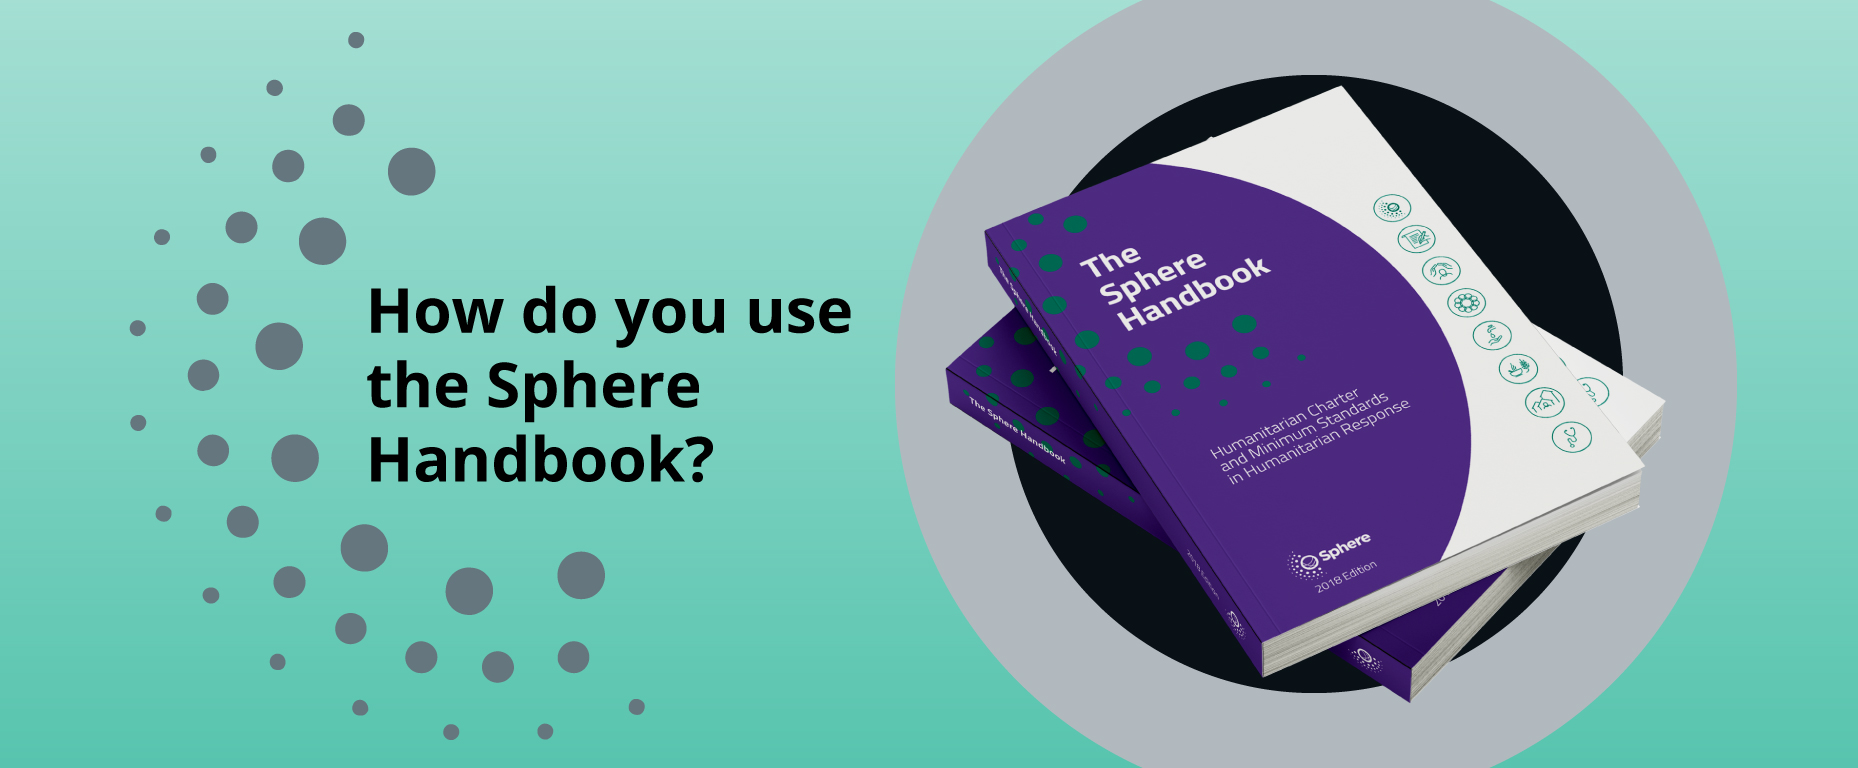 How do you use the Sphere Handbook?